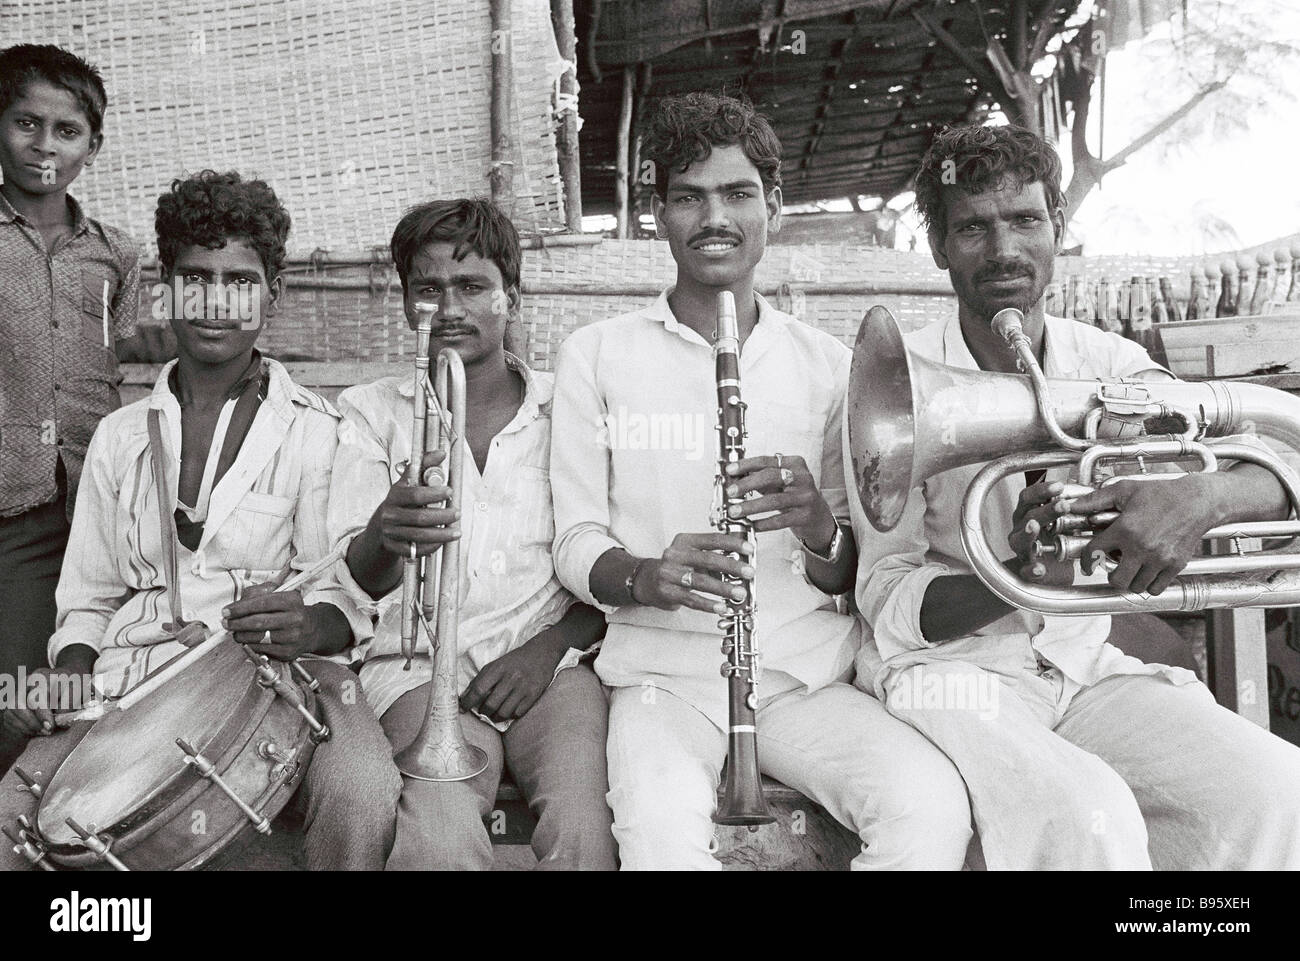 A brass wedding band photographed in Hampi, India Stock Photo